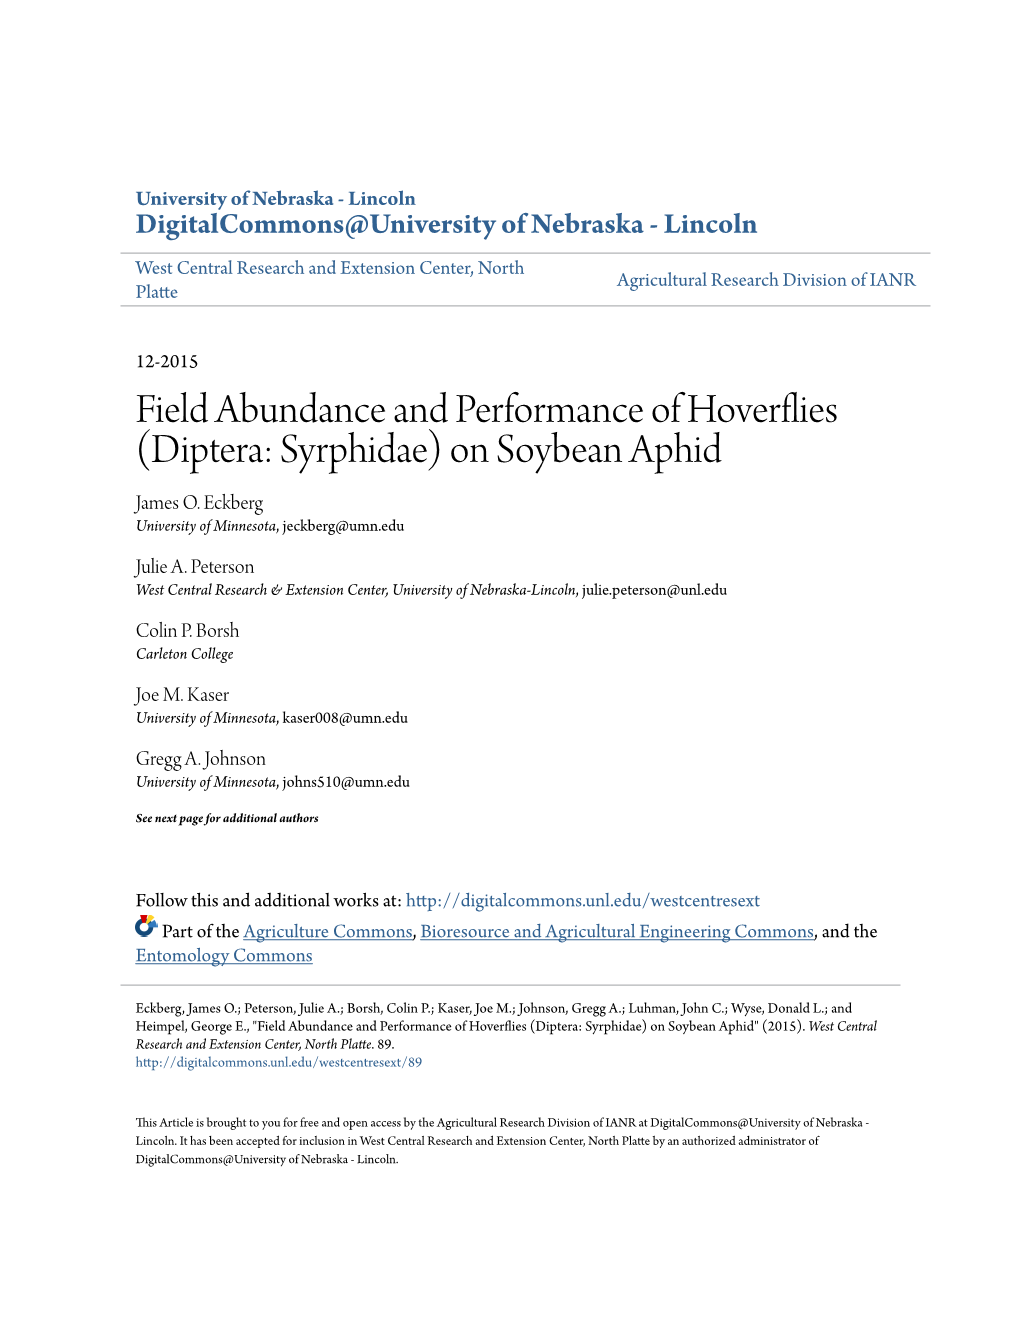 Field Abundance and Performance of Hoverflies (Diptera: Syrphidae) on Soybean Aphid James O